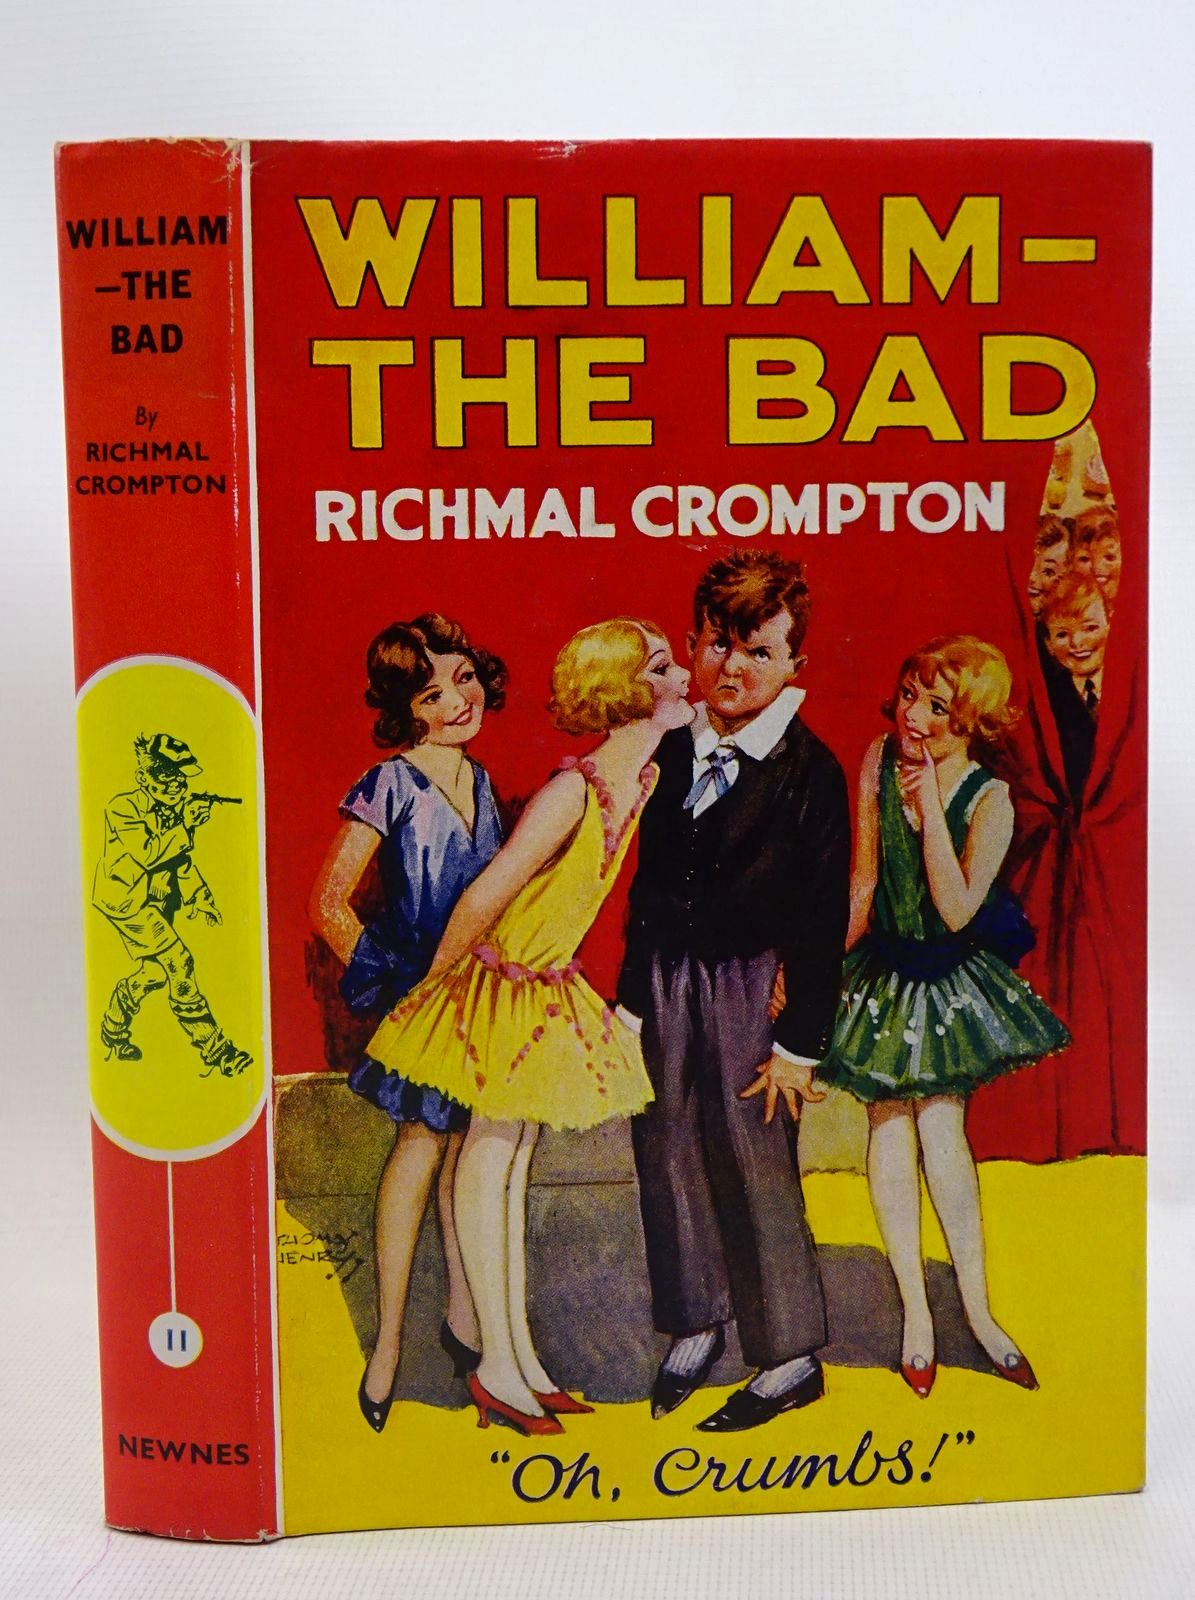 Cover of WILLIAM THE BAD by Richmal Crompton